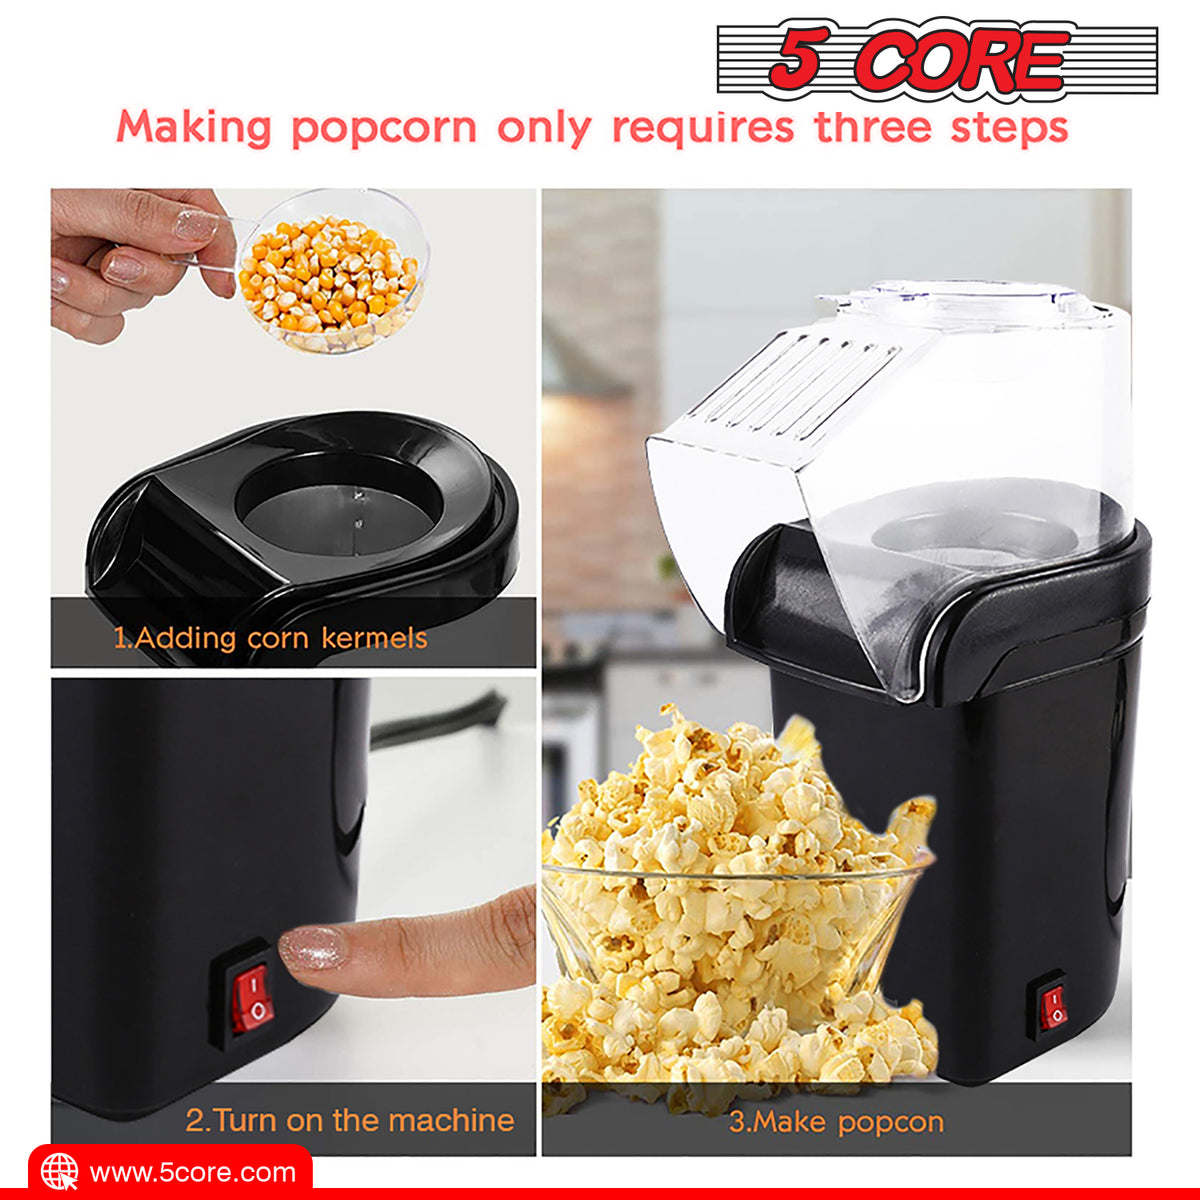 5 Core Hot Air Popcorn Popper Machine 1200W Electric Popcorn Kernel Corn Maker Bpa Free, 95% Popping Rate, 2 Minutes Fast, No Oil-Healthy Snack for Kids Adults, Home, Party, Gift POP